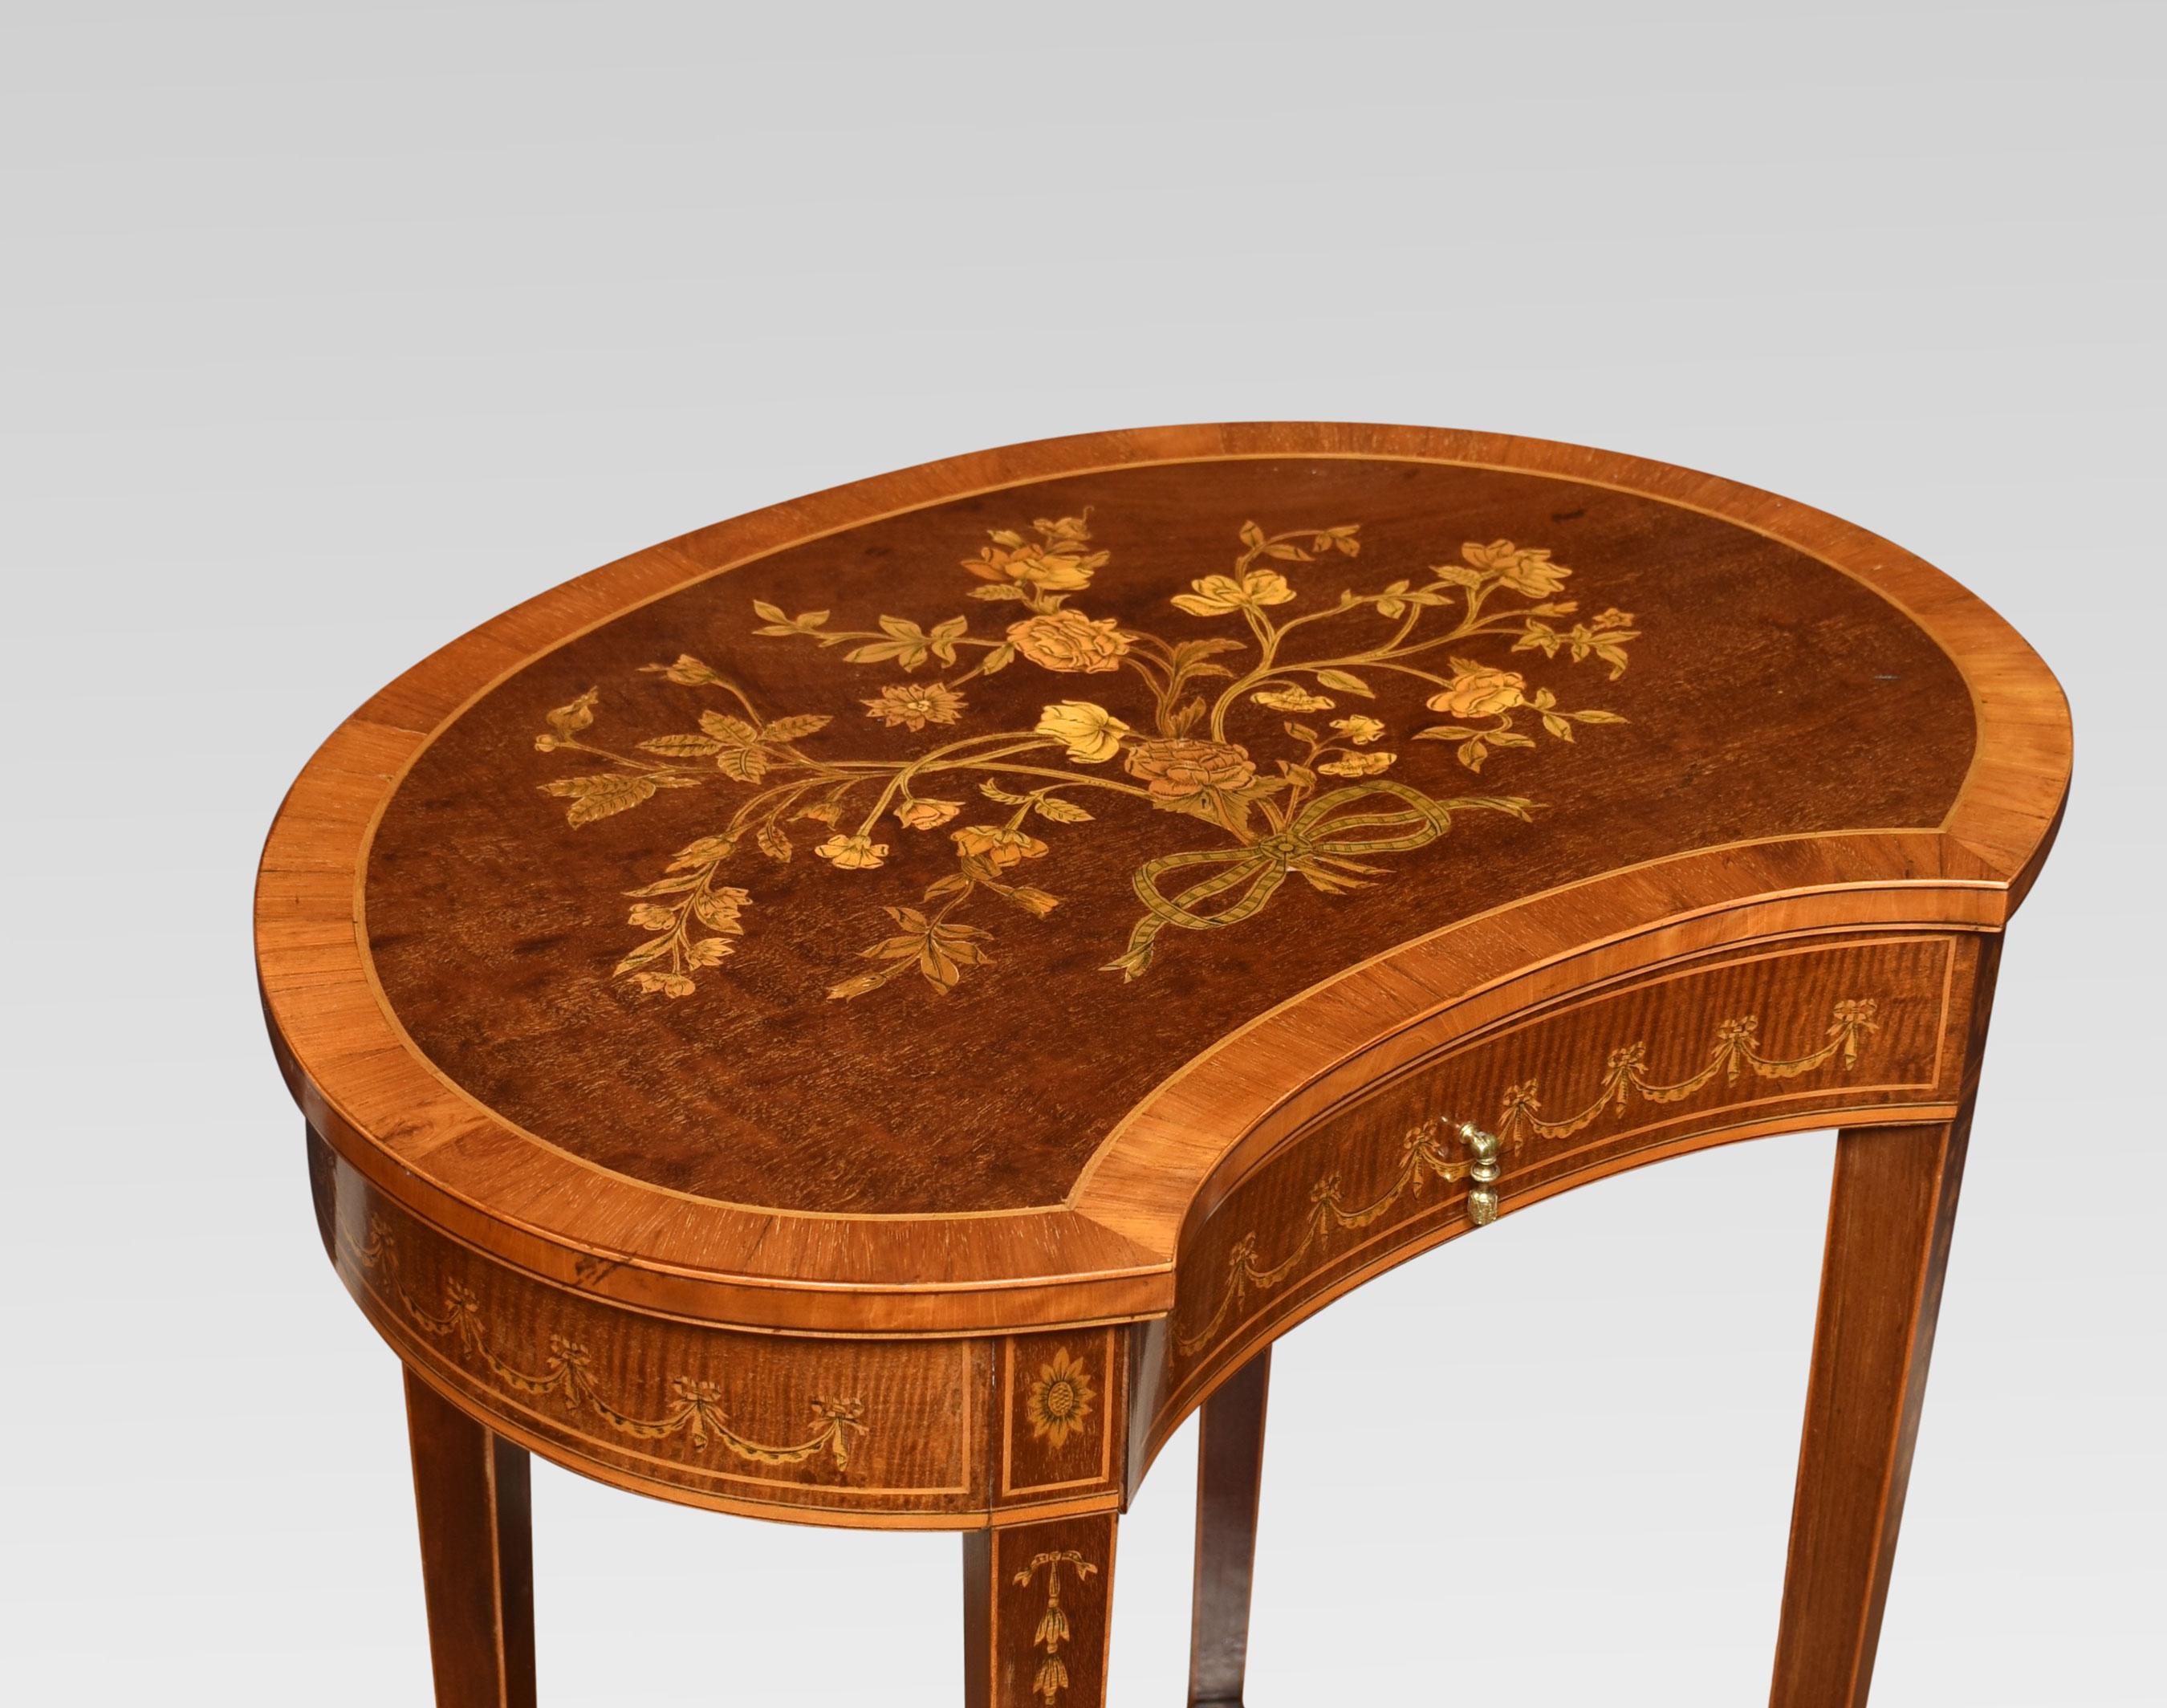 Inlaid mahogany kidney-shaped side table, the plum pudding and banded top decorated with ribbon tied flowers, above a fiddle back mahogany drawer with decorated swag design. Raised up on slender tapering legs with bellflower detail, united by an